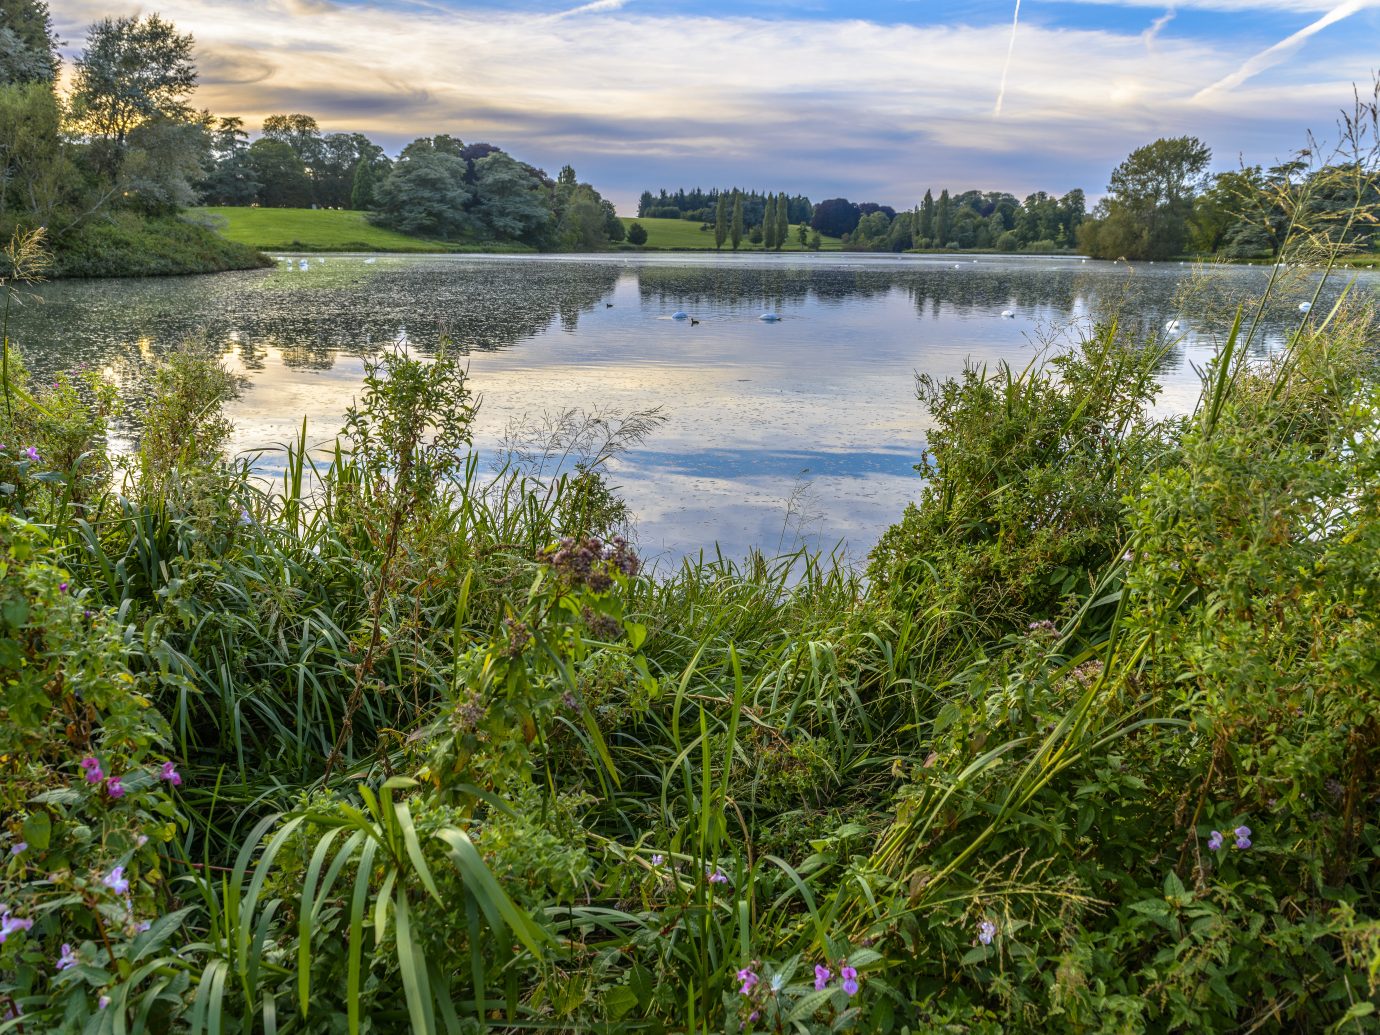 The lake in Blenheim Palace